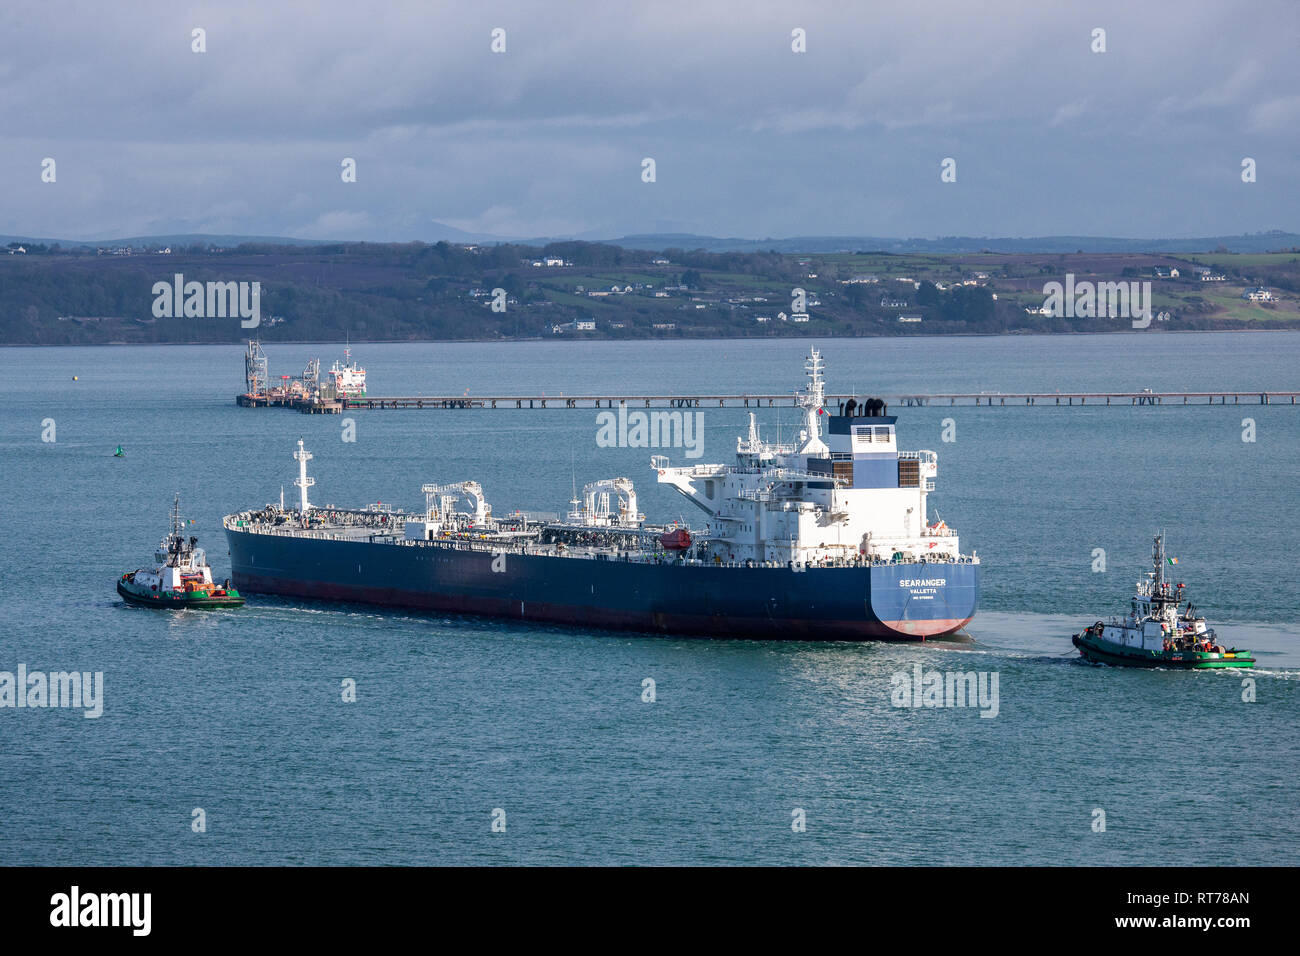 Whitegate, Cork, Ireland. 28th Feb, 2019. Port of Cork tug Alex assist the 250 meter oil tanker Searanger as she makes her way to a berth at the Whitegate Oil Refinery in Co. Cork, Ireland. Credit: David Creedon/Alamy Live News Stock Photo